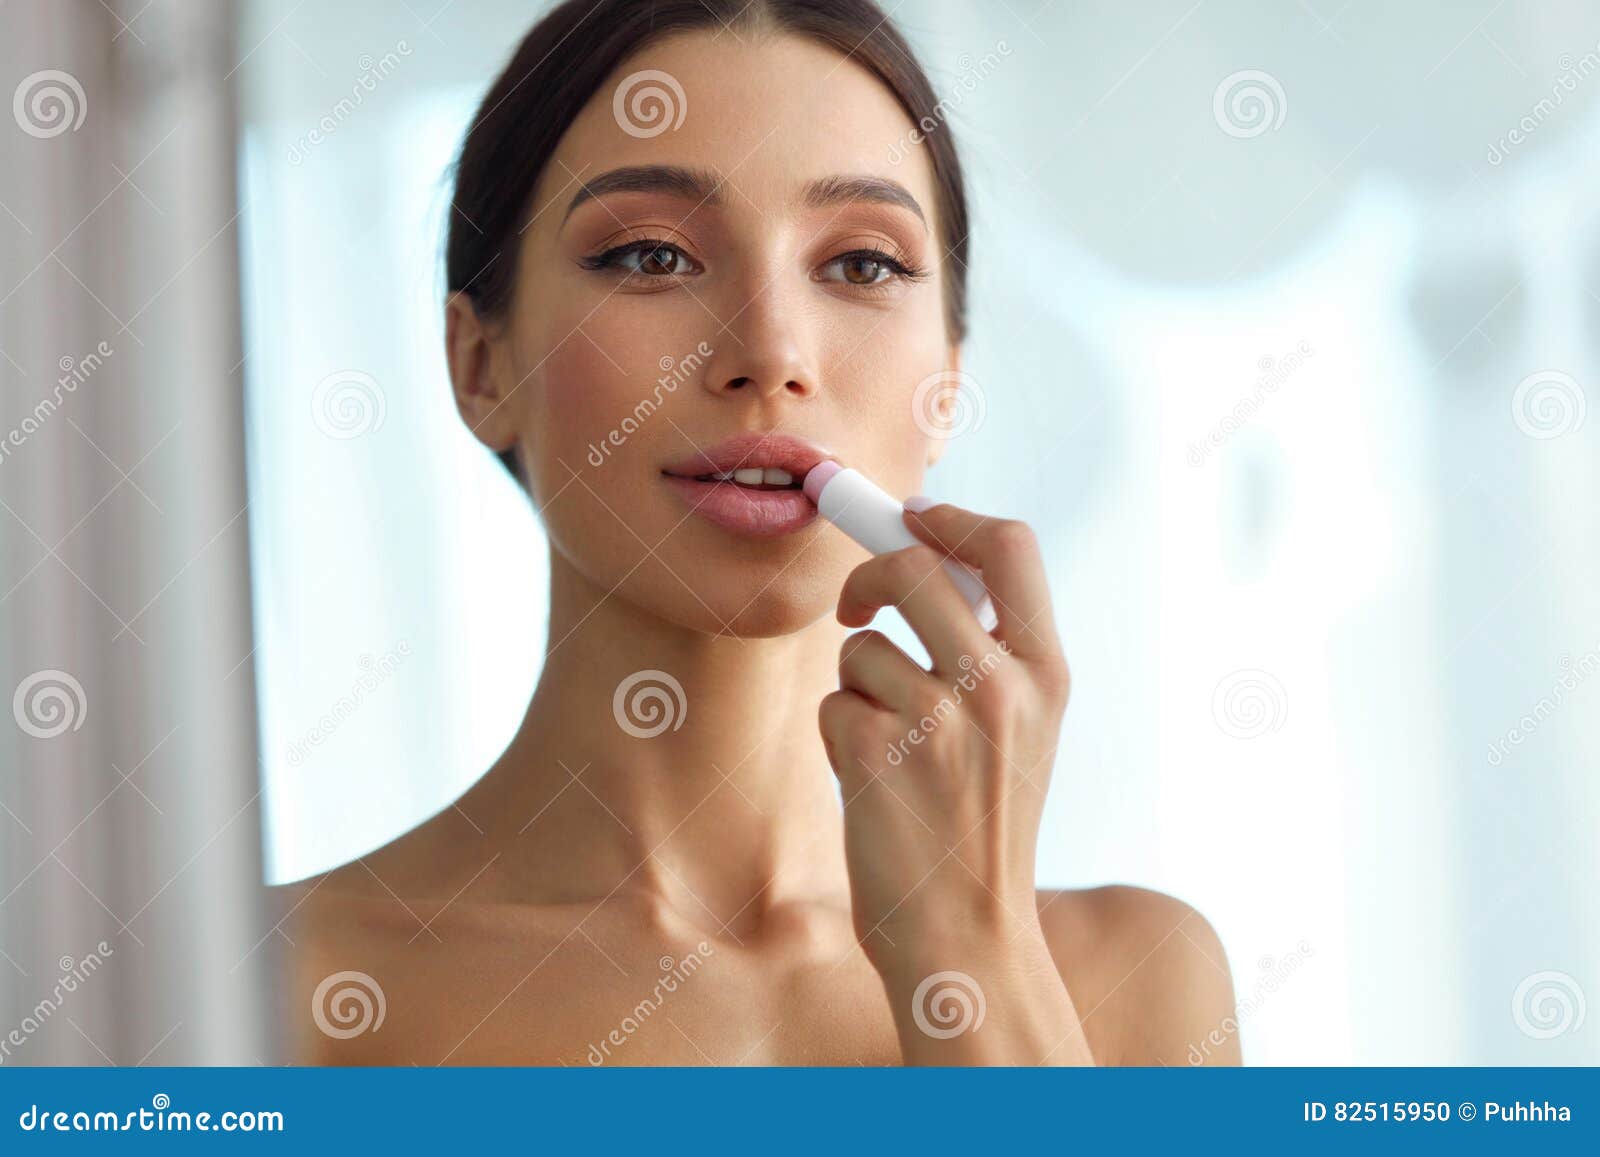 beautiful woman with beauty face applies balm on lips. skin care